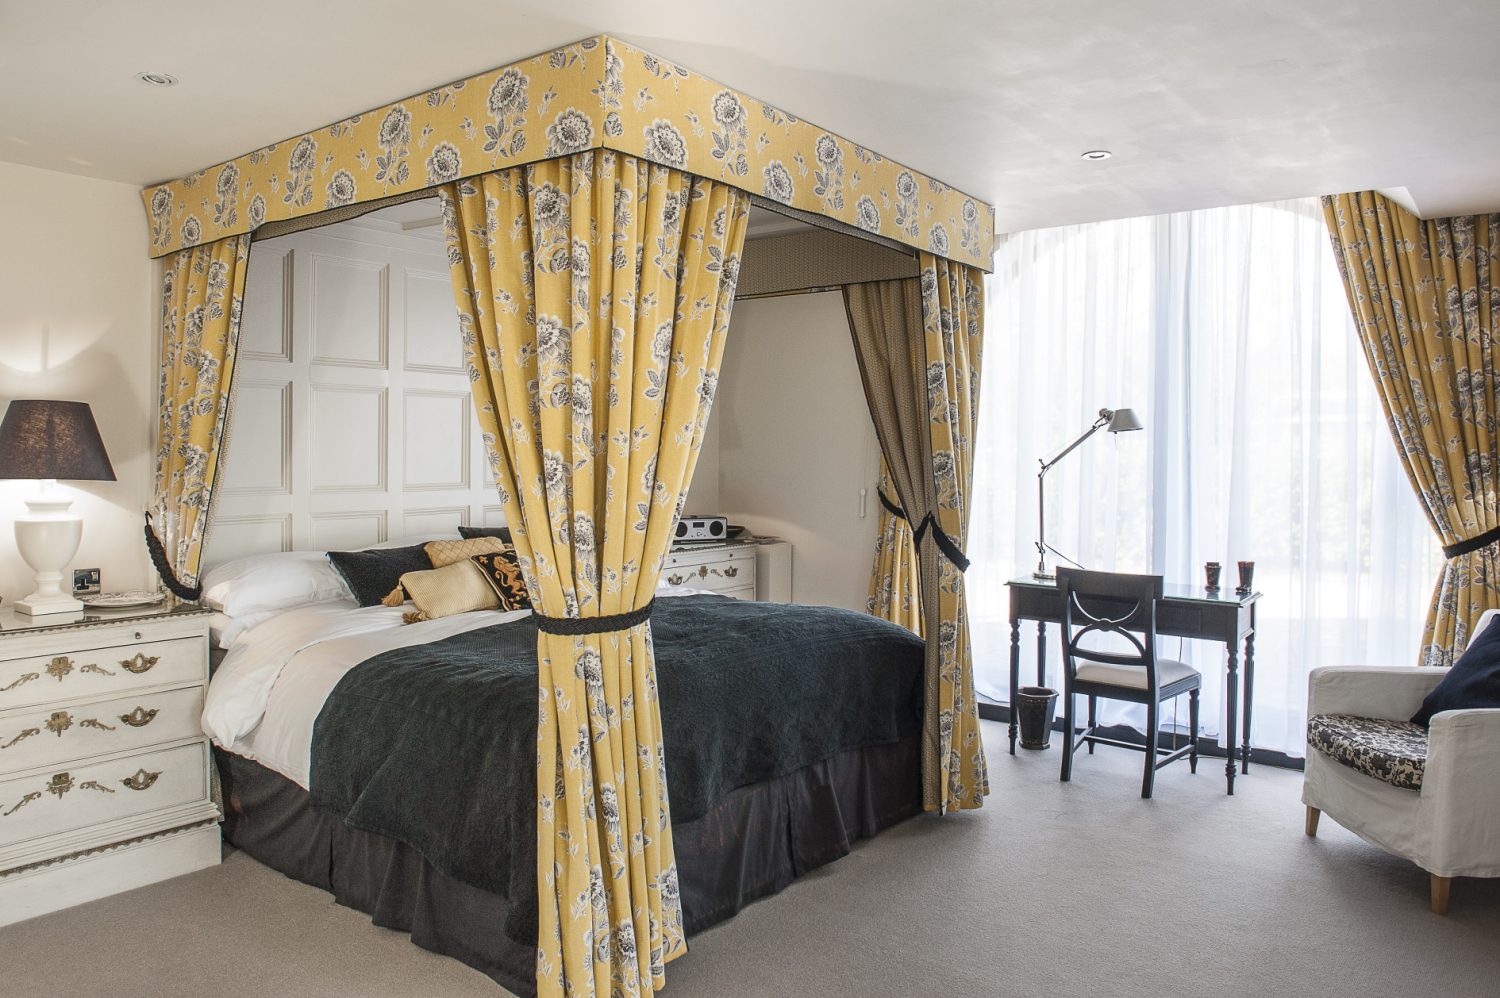 Situated in the granary, Keynes features a super king-sized draped bed and antique, painted, glass-fronted armoire